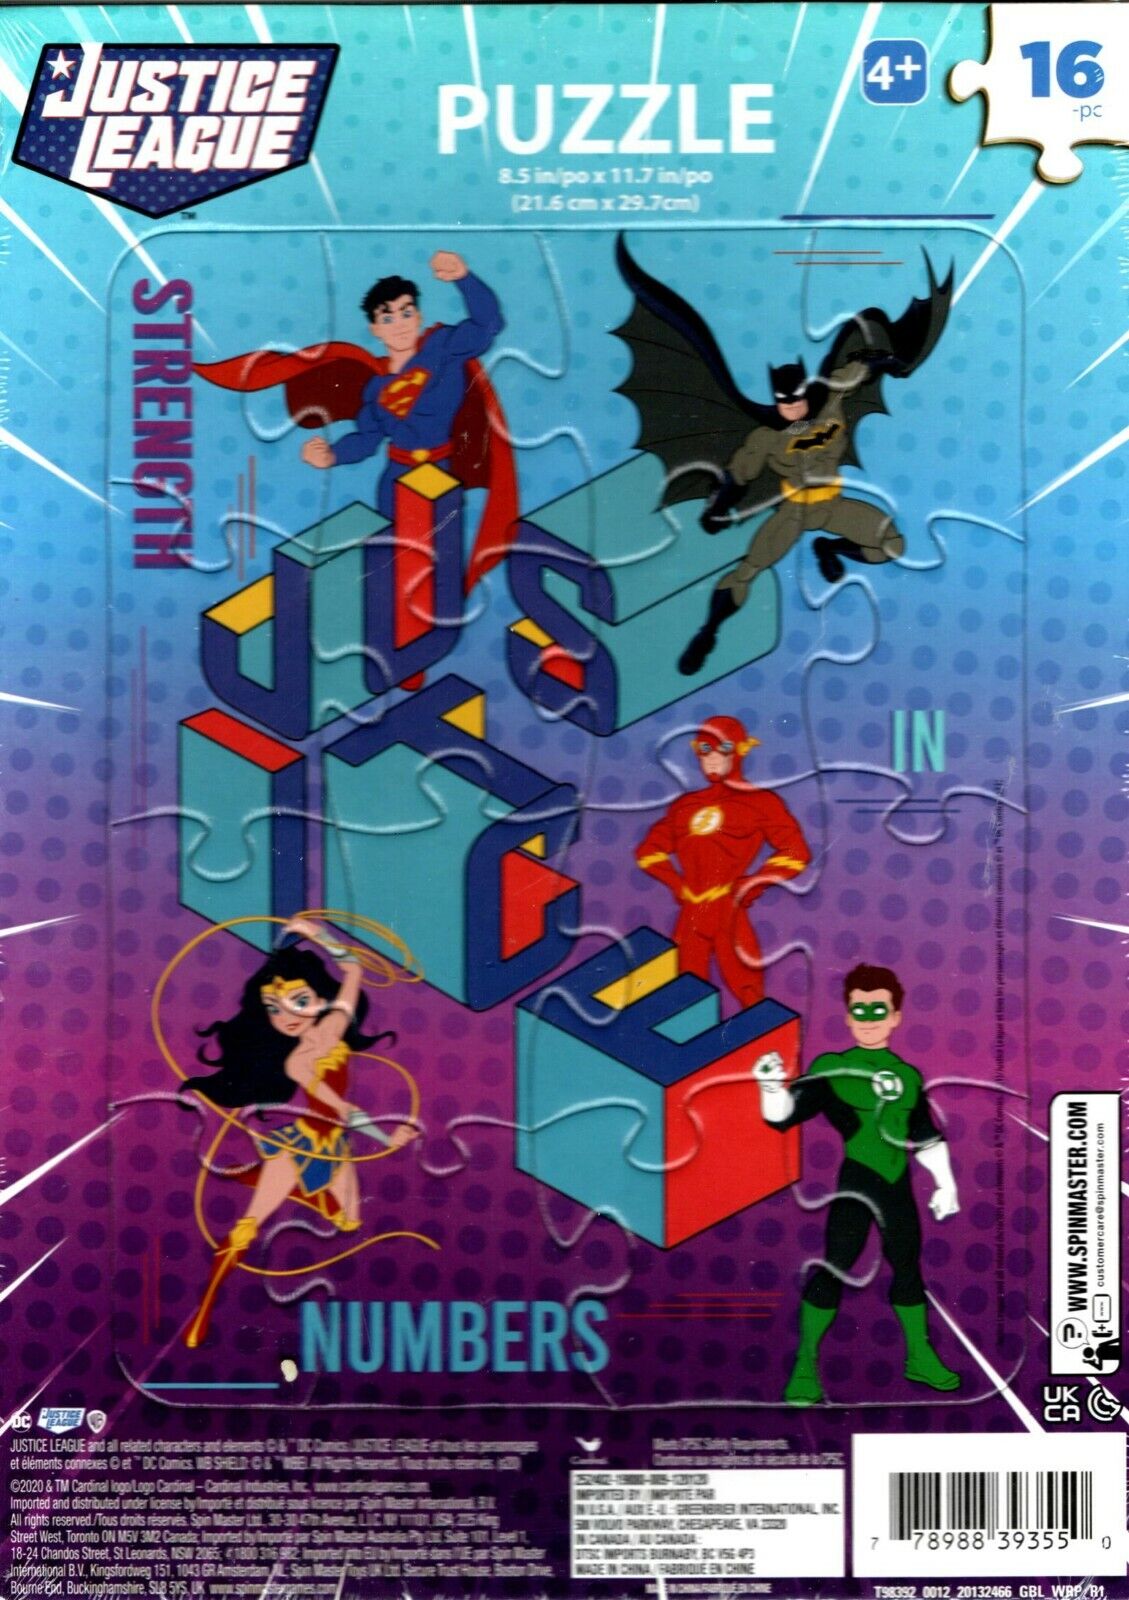 Justice League Multi character - 16 Pieces Jigsaw Puzzle